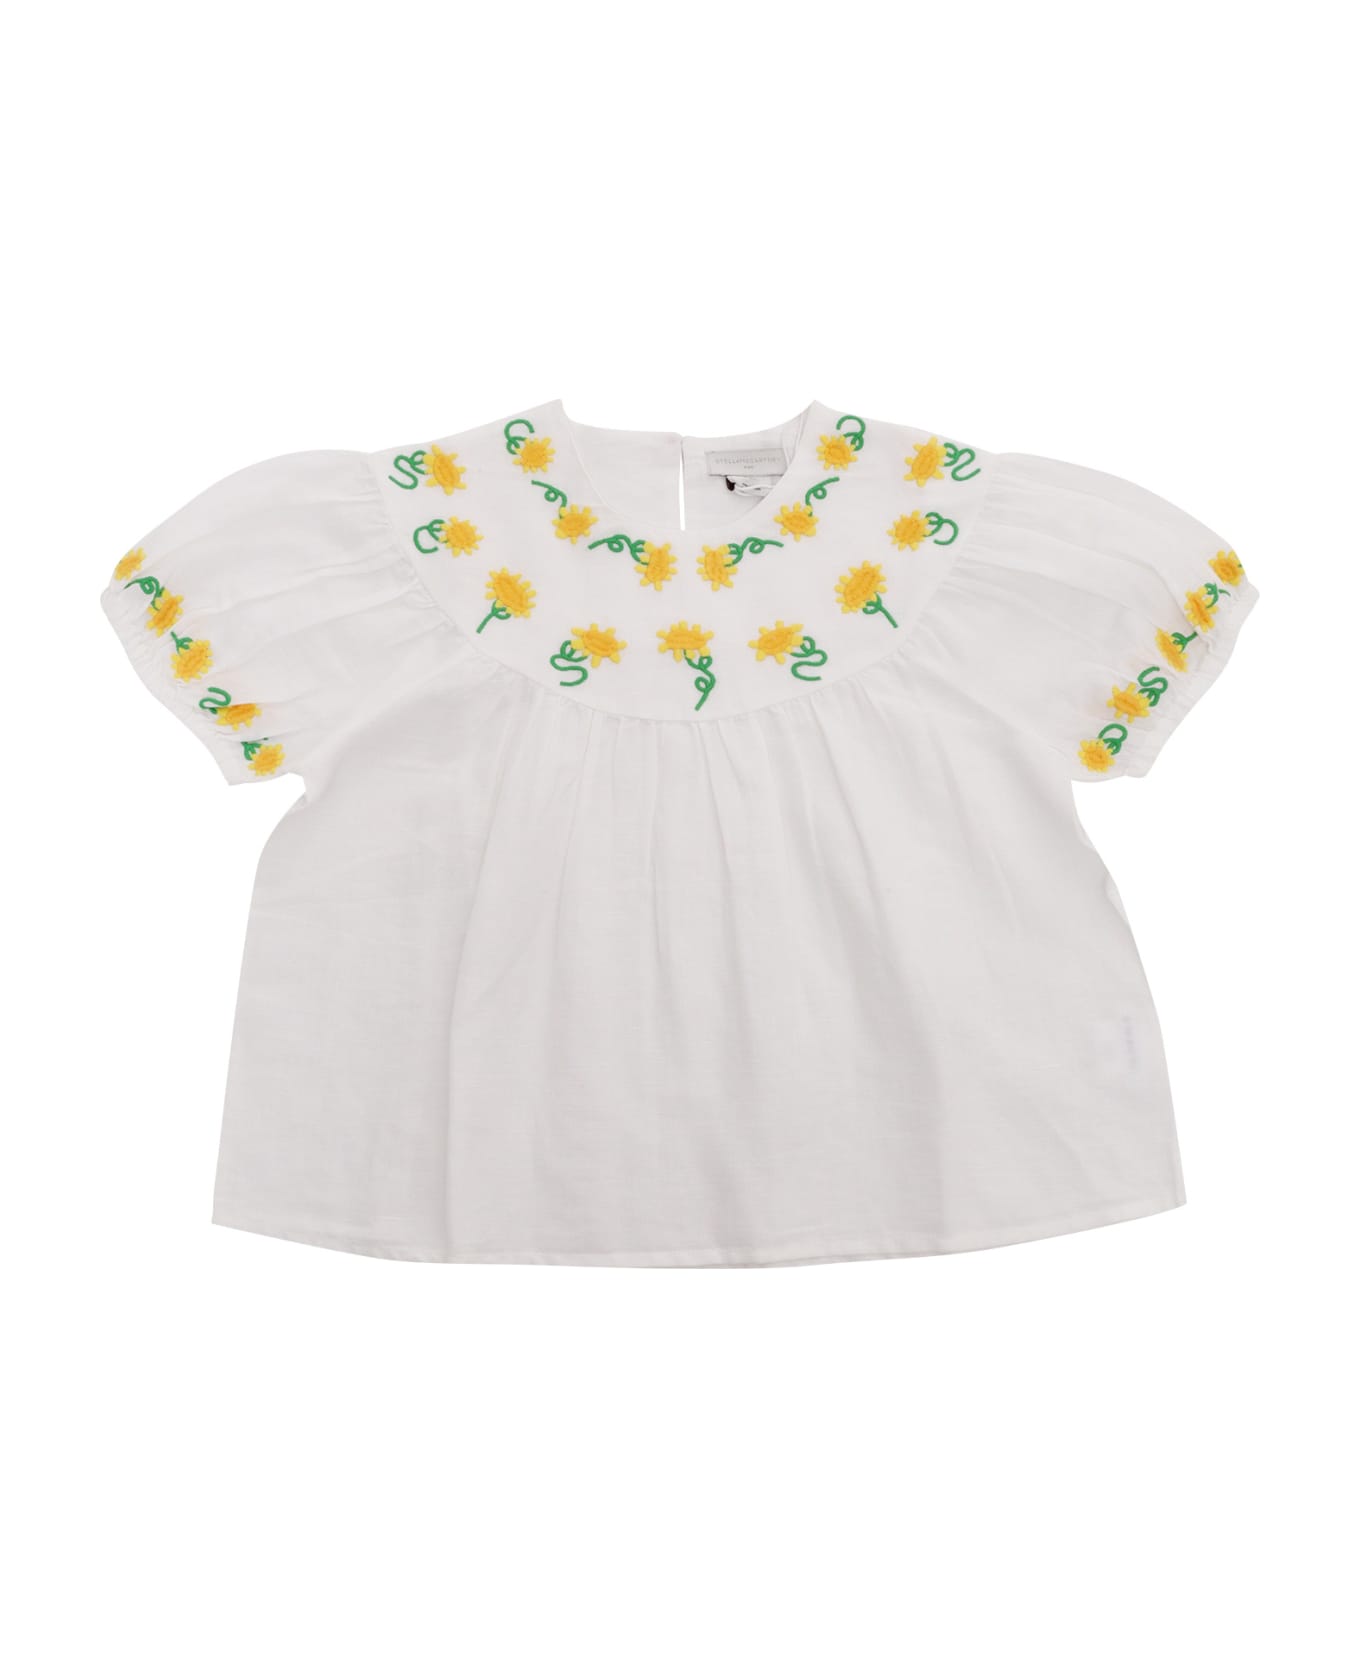 Stella McCartney Kids White Blouse With Flowers - WHITE トップス